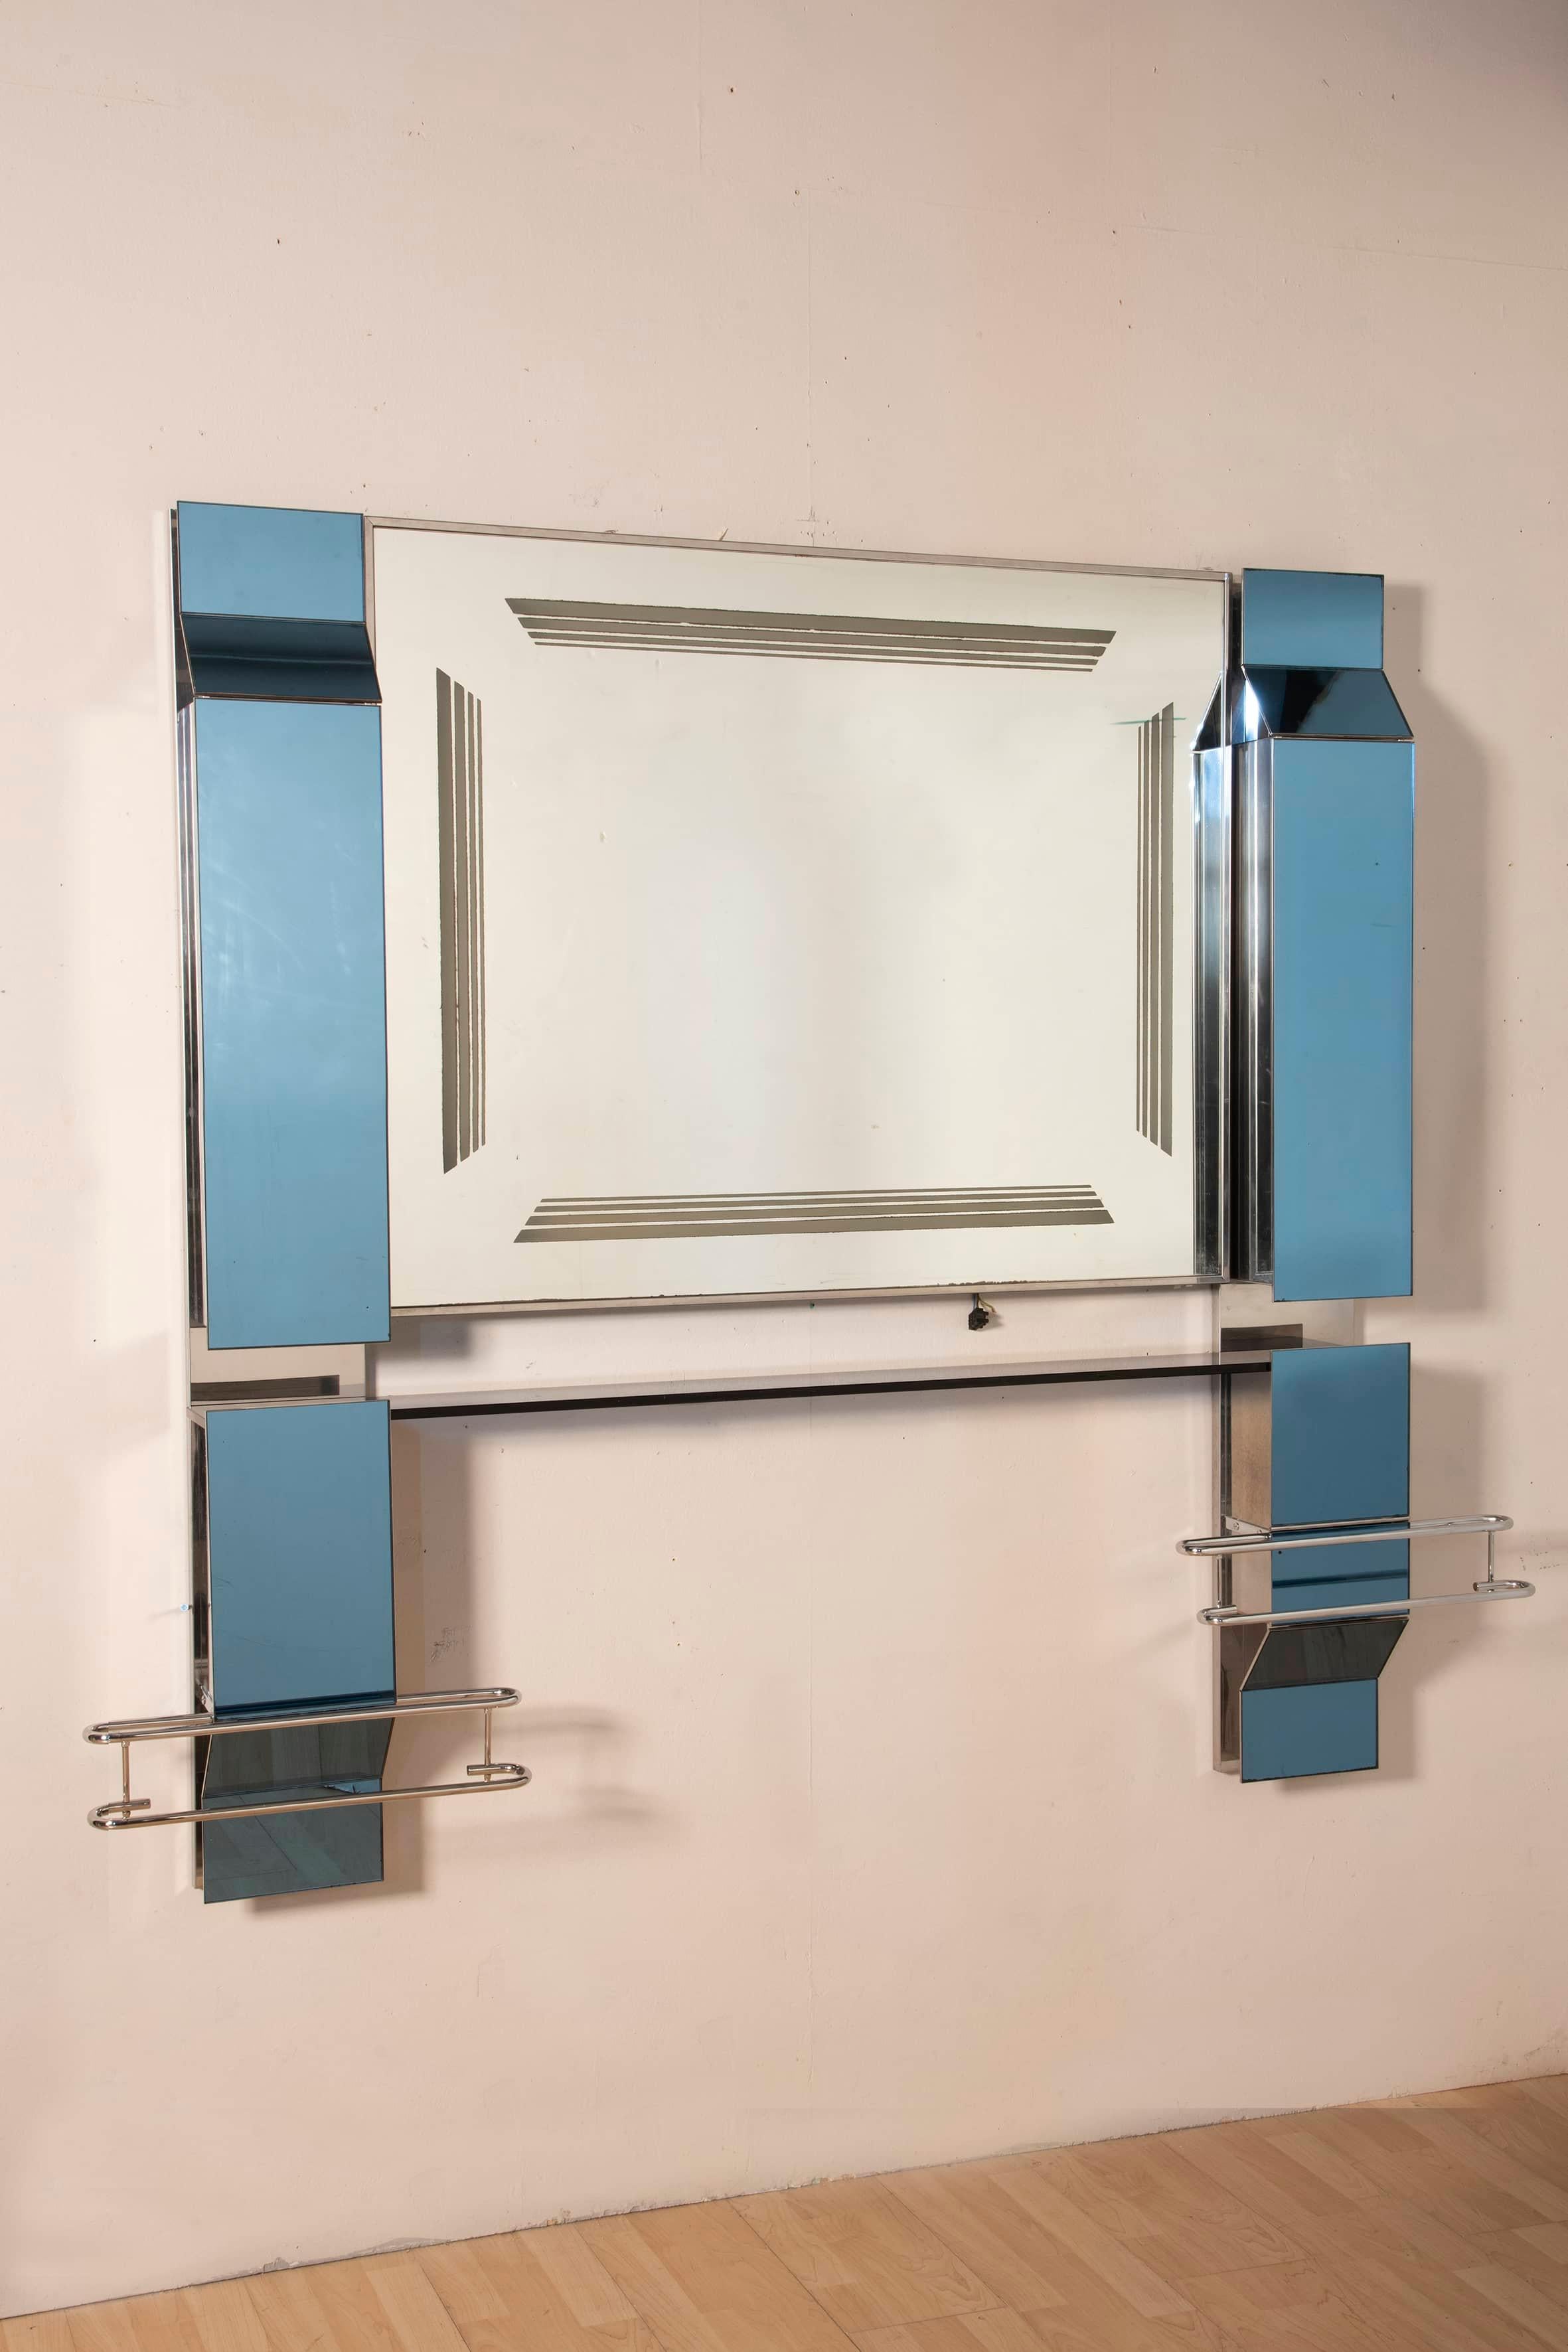 Rare Vintage Bathroom Furniture Mirrored Cabinet by FontanaArte with Lights. High blue side panels open and allow products to be arranged on small glass shelves. The blue mirror panels at the bottom, on the other hand, flip open and conceal